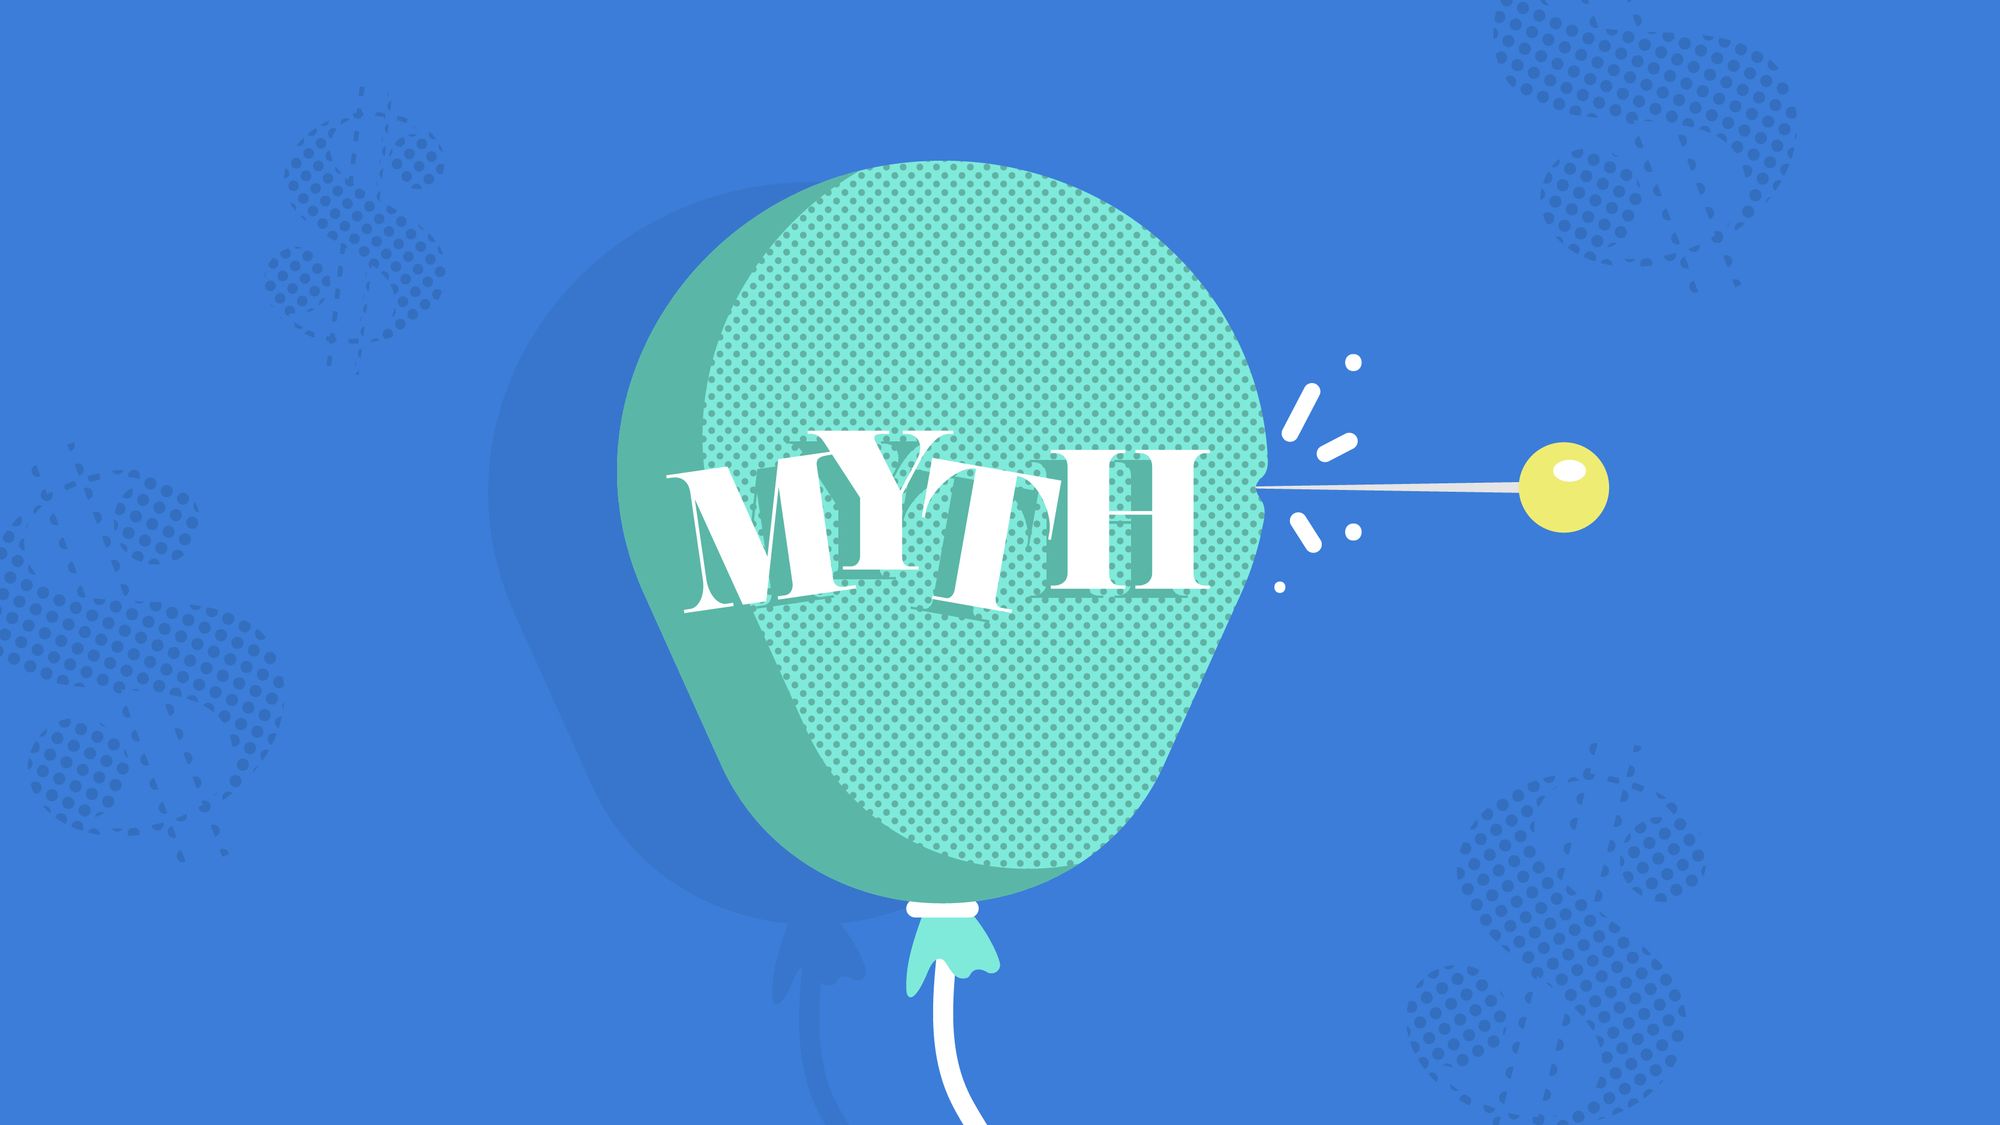 Graphic of balloon with word "myth" on it being popped